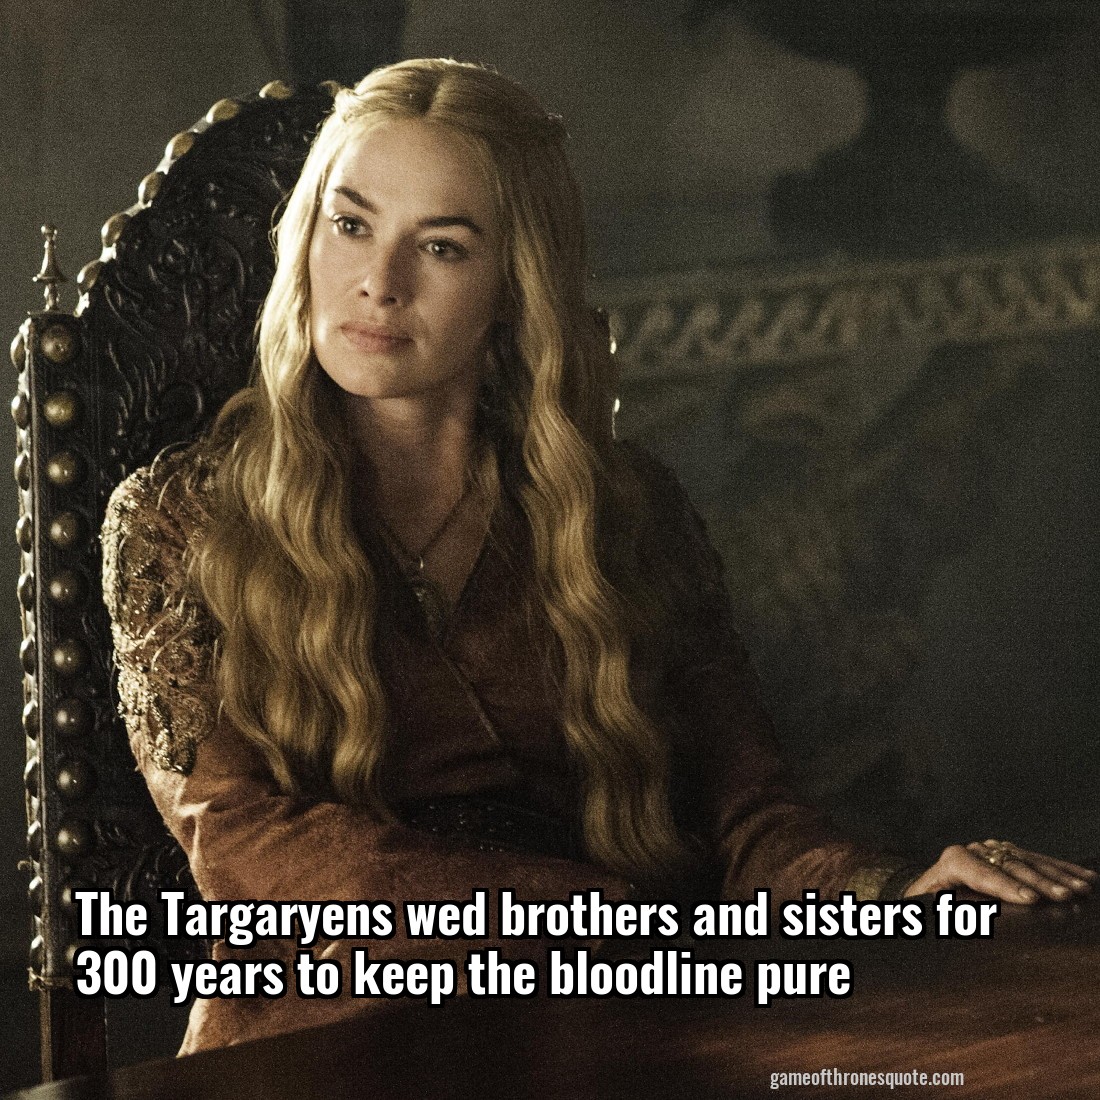 The Targaryens wed brothers and sisters for 300 years to keep the bloodline pure